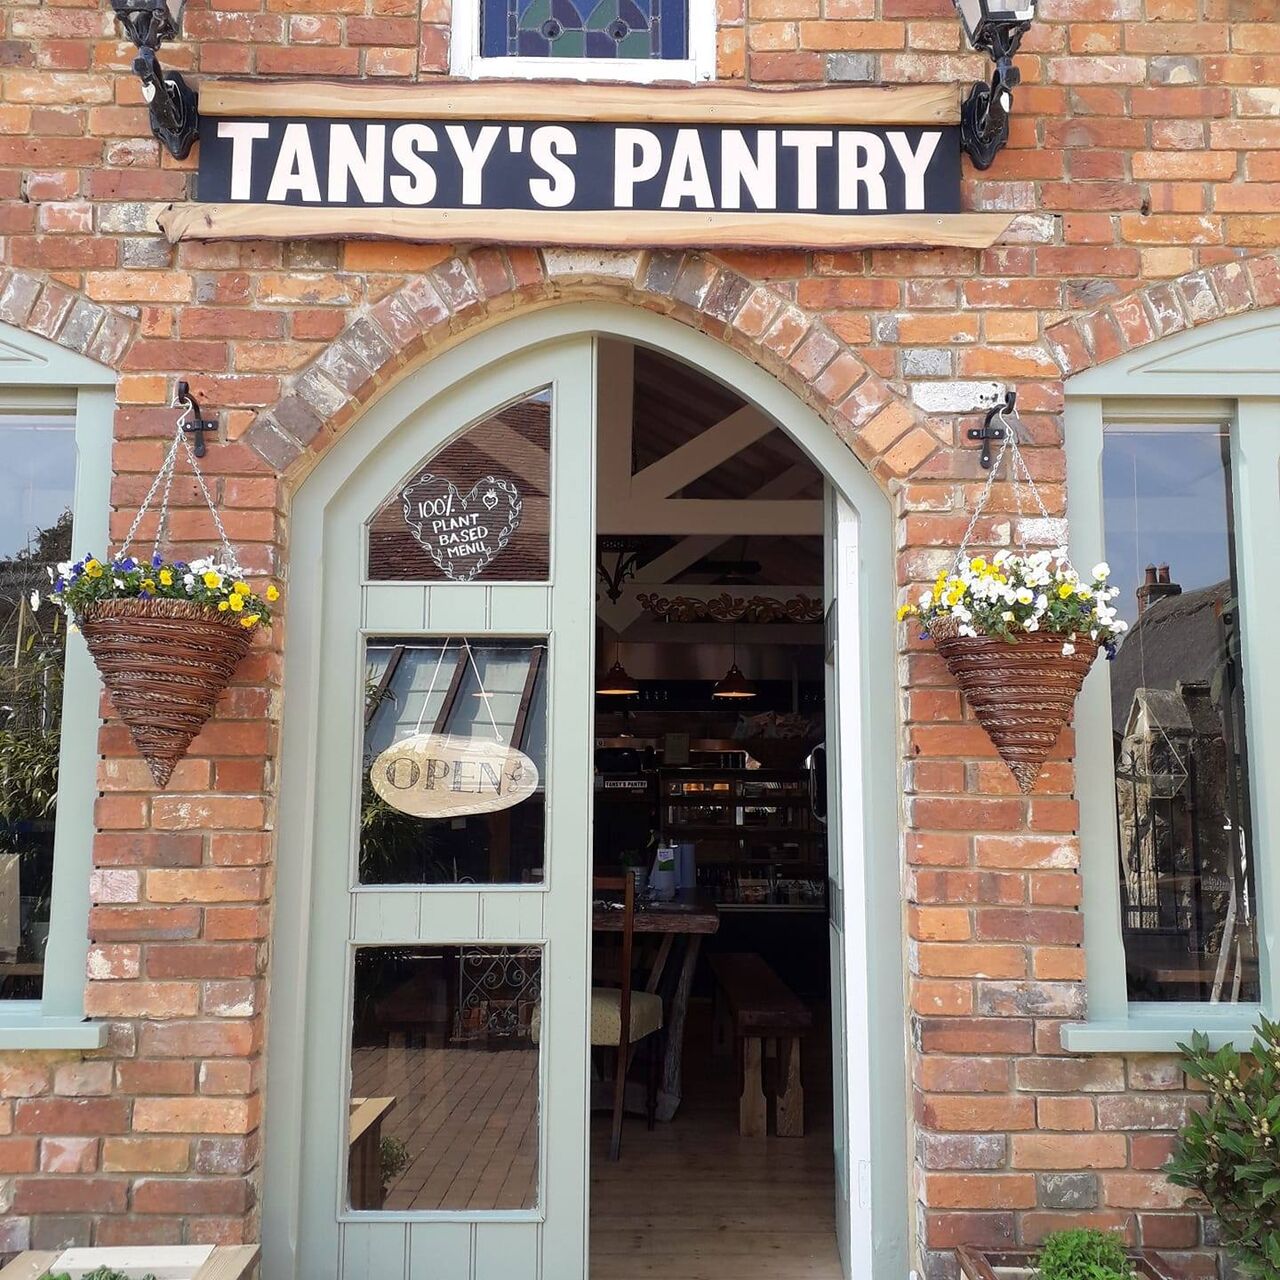 A photo of Tansy’s Pantry